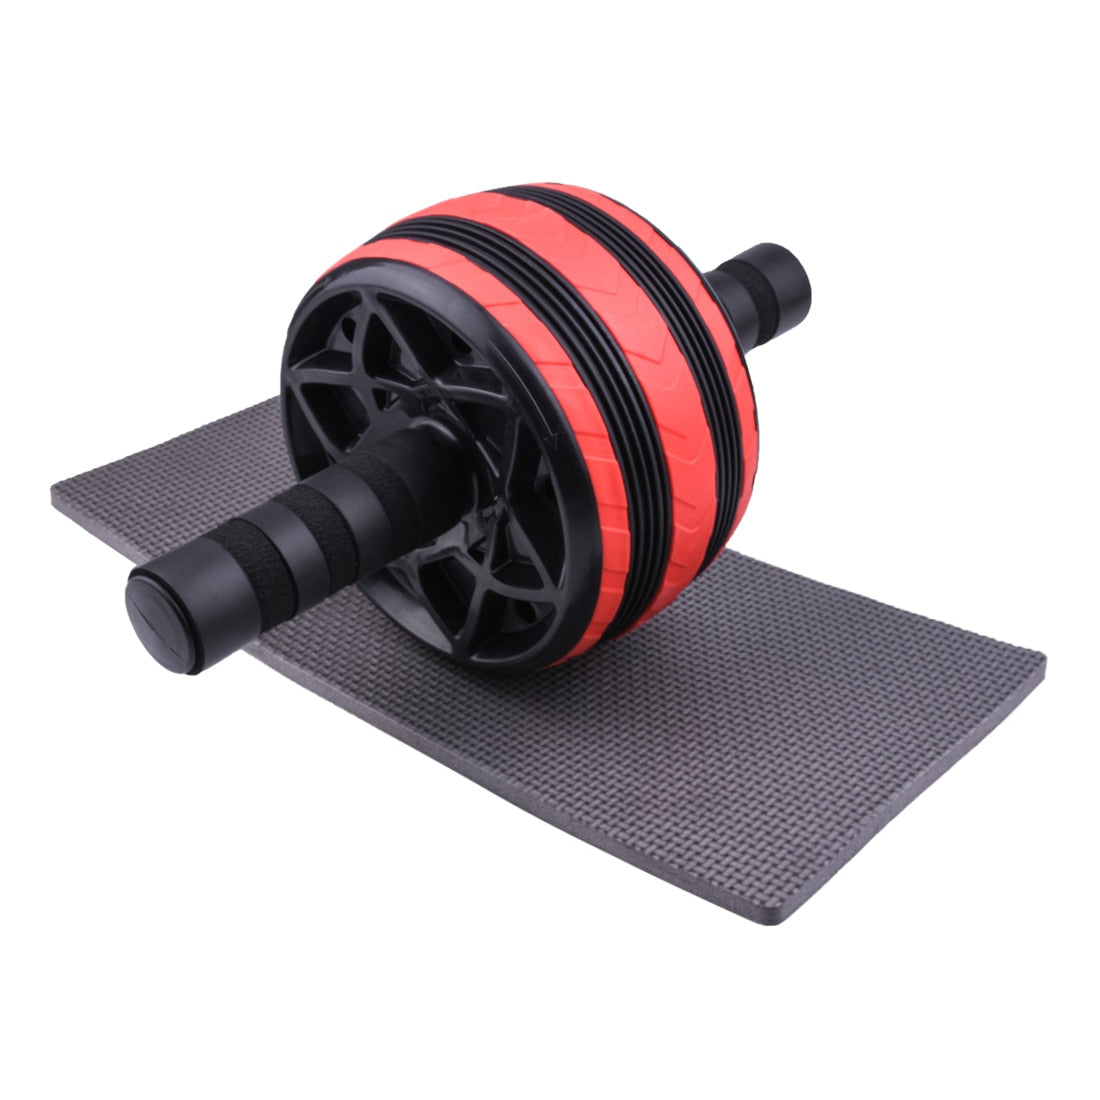 AB Roller Wheel Machine Abdominal Exercise Trainer Health and Fitness Workout Equipment for Home Gym with Mat Boxing Training